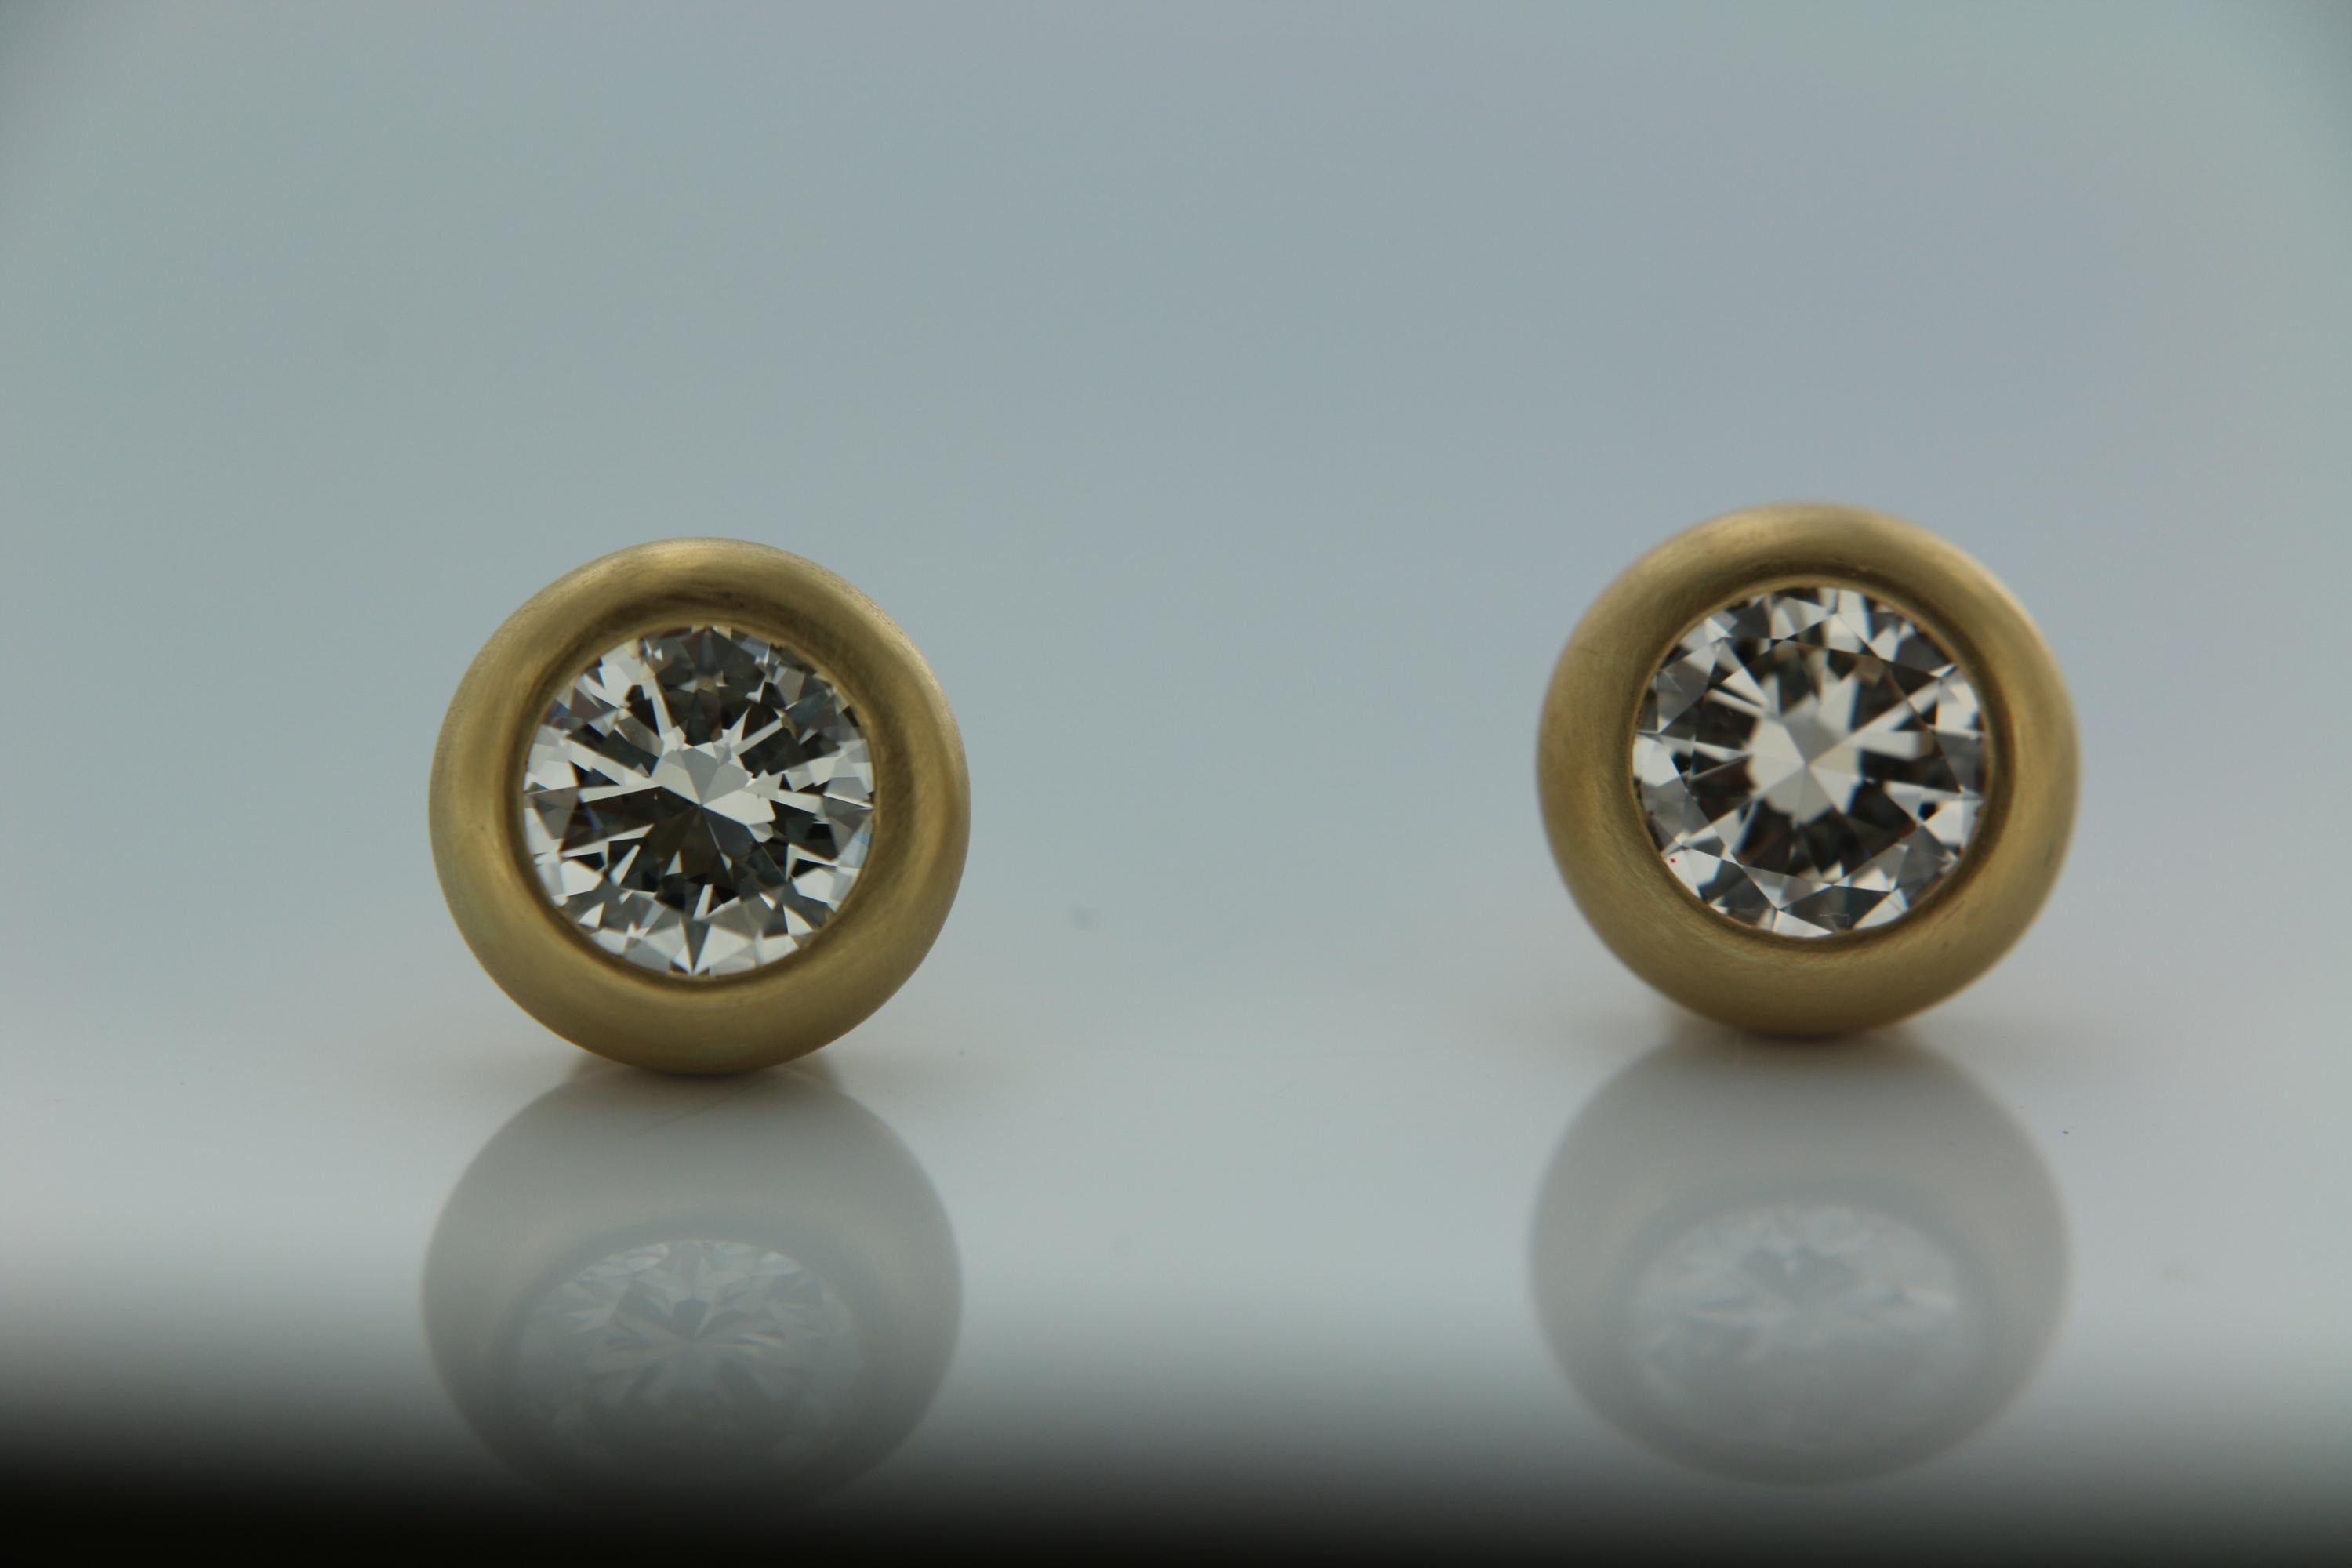 Classic and elegant solitaire stud earrings features two white round brilliant diamonds weighing  1.88 carat  and 1.78carat ( 3.66 carat ) with I color and VS clarity. These are hand crafted and bezel set with open back in 18K brushed yellow gold.